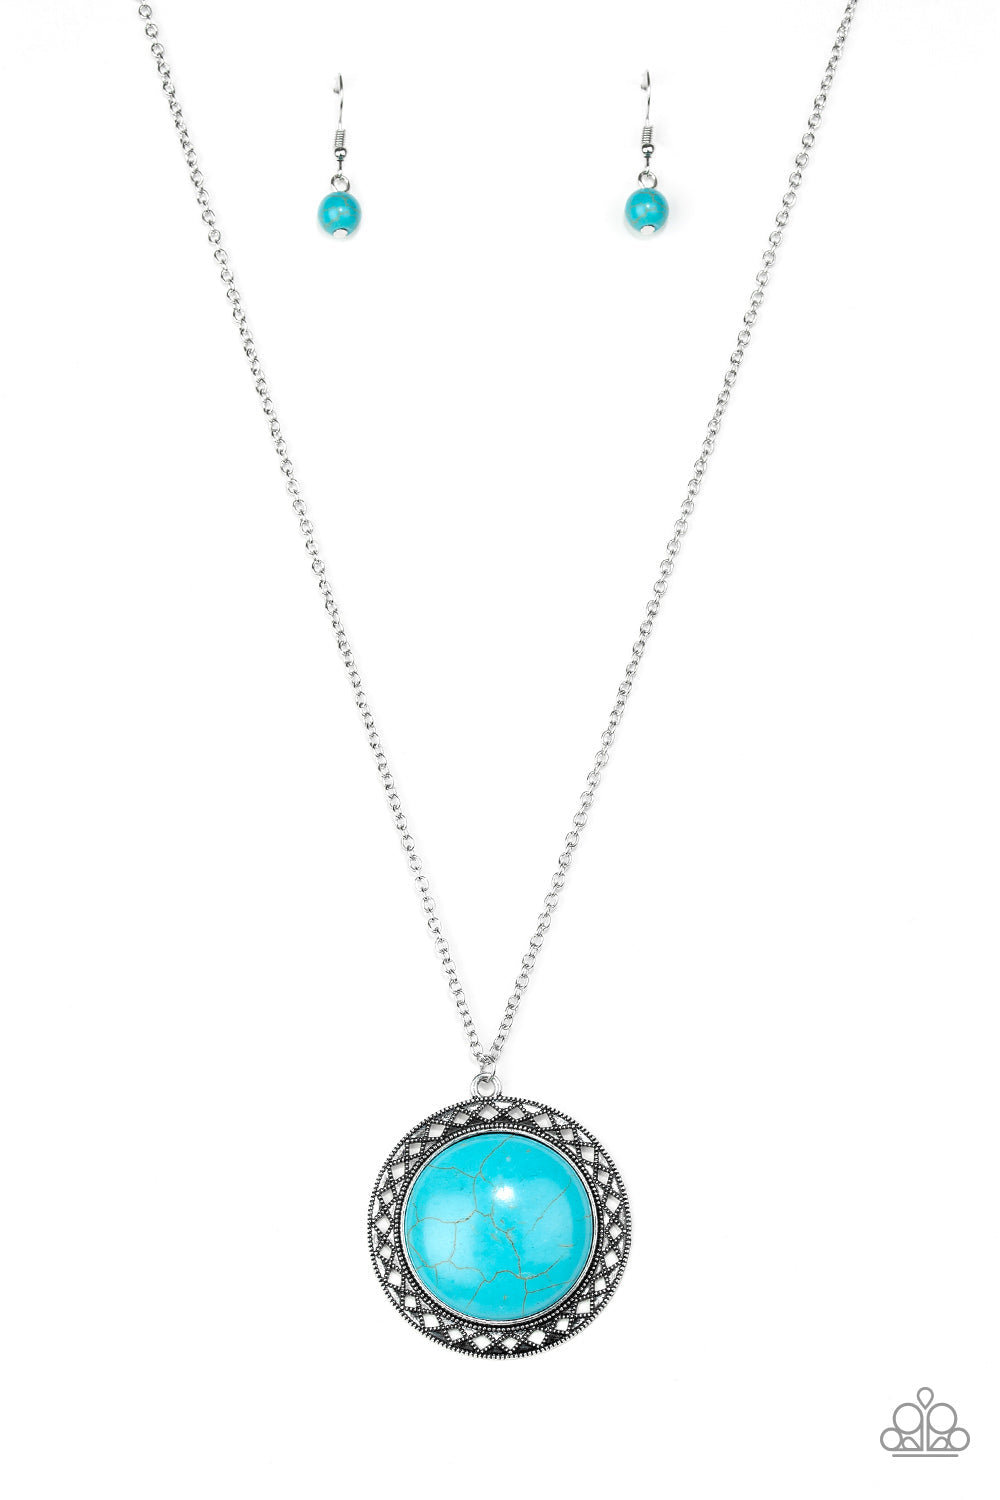 Run Out Of RODEO - Blue Turquoise - Silver Necklace - Paparazzi Accessories - Turquoise stone is pressed into the center of a shimmery silver frame radiating with sunburst details. The earthy frame swings from the bottom of a lengthened silver chain for a seasonal finish. 